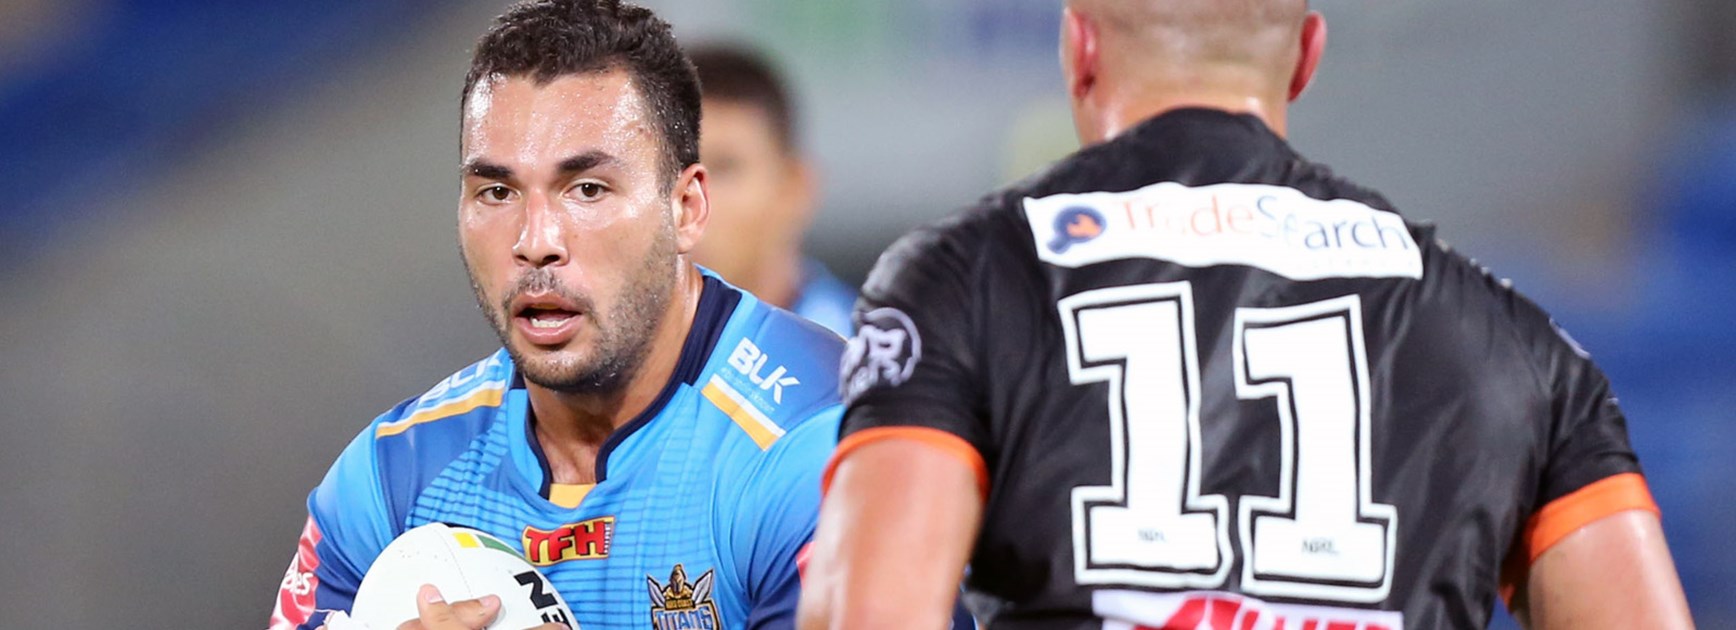 Ryan James in action for the Titans against Wests Tigers.